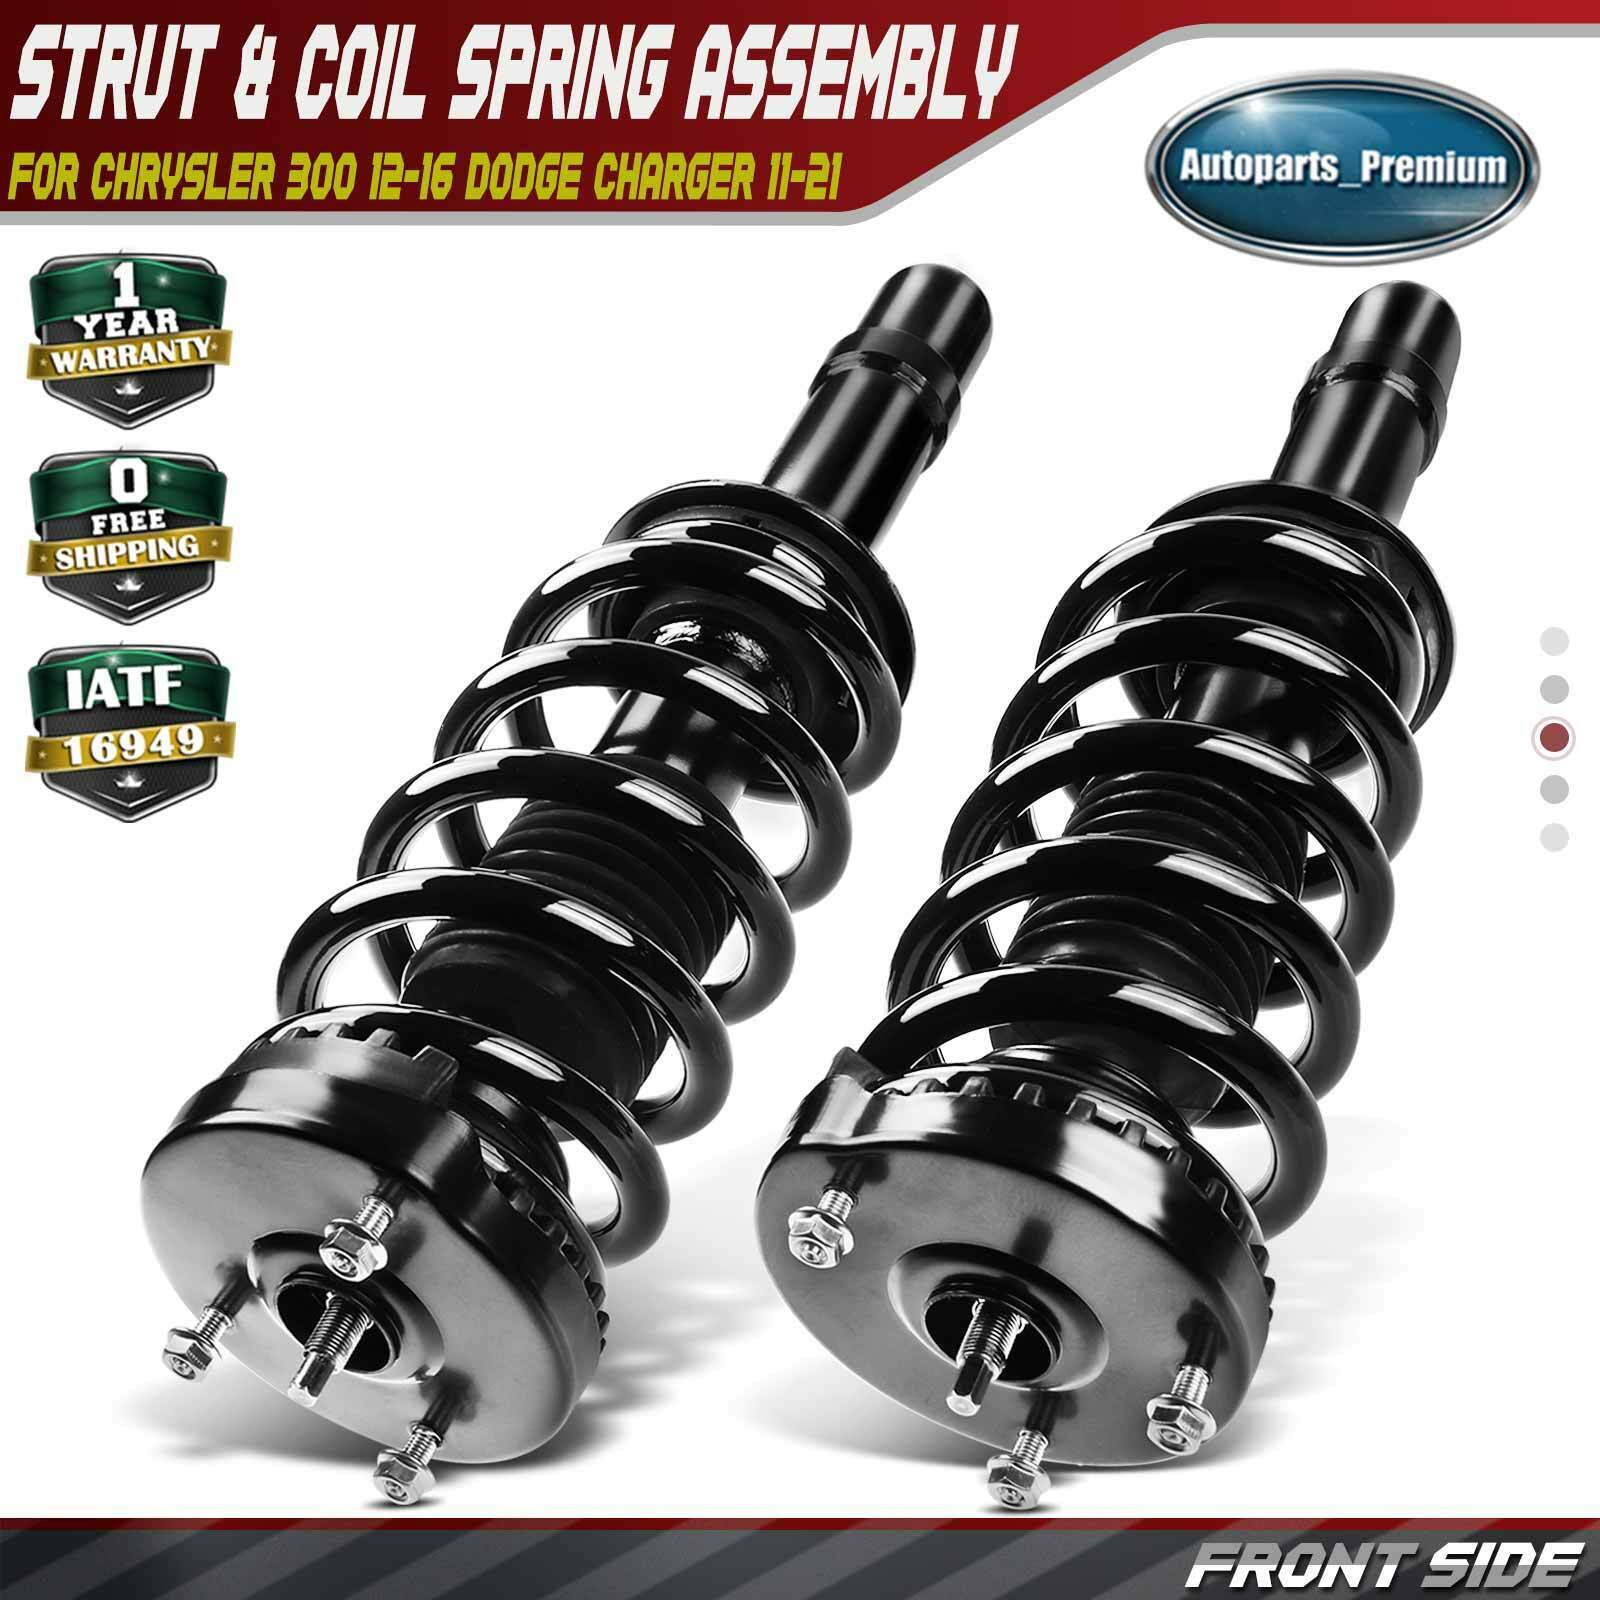 2x Complete Strut & Coil Spring Assembly for Chrysler 300 Dodge Charger 5.7L AWD